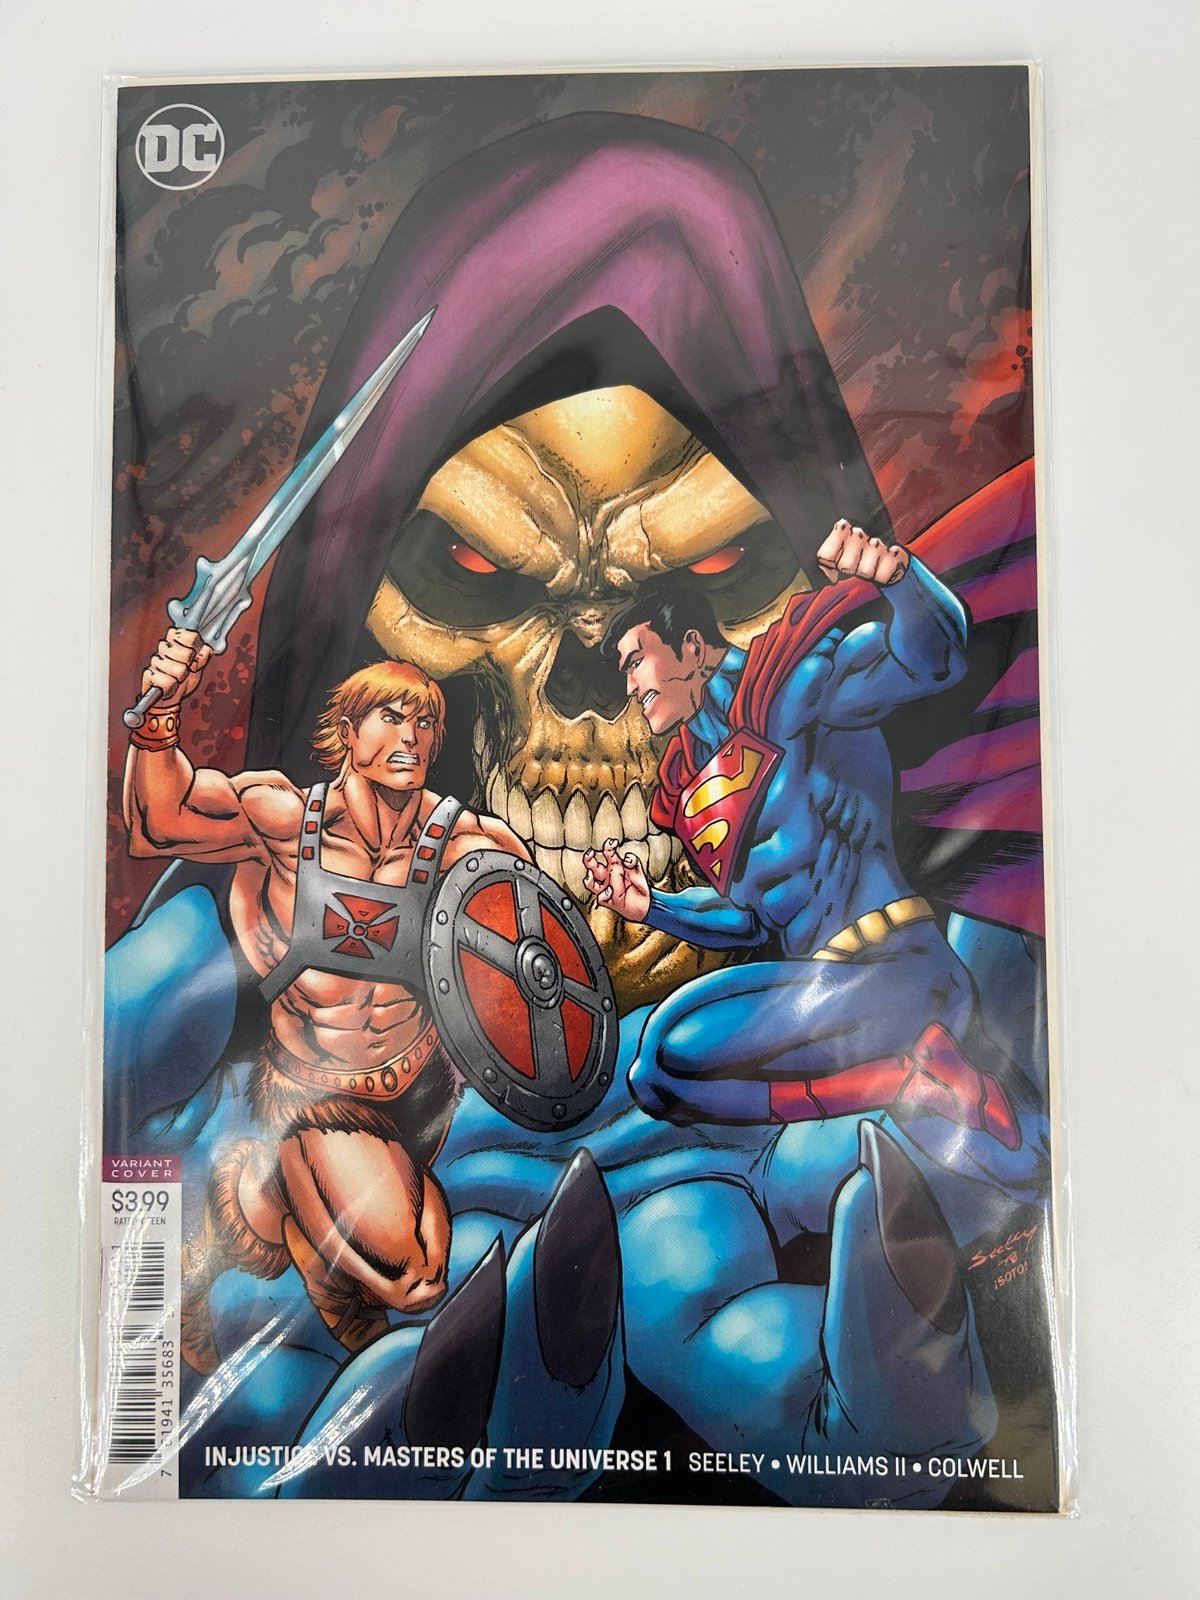 Injustice vs masters of the universe #1 variant NbEucm3Yu